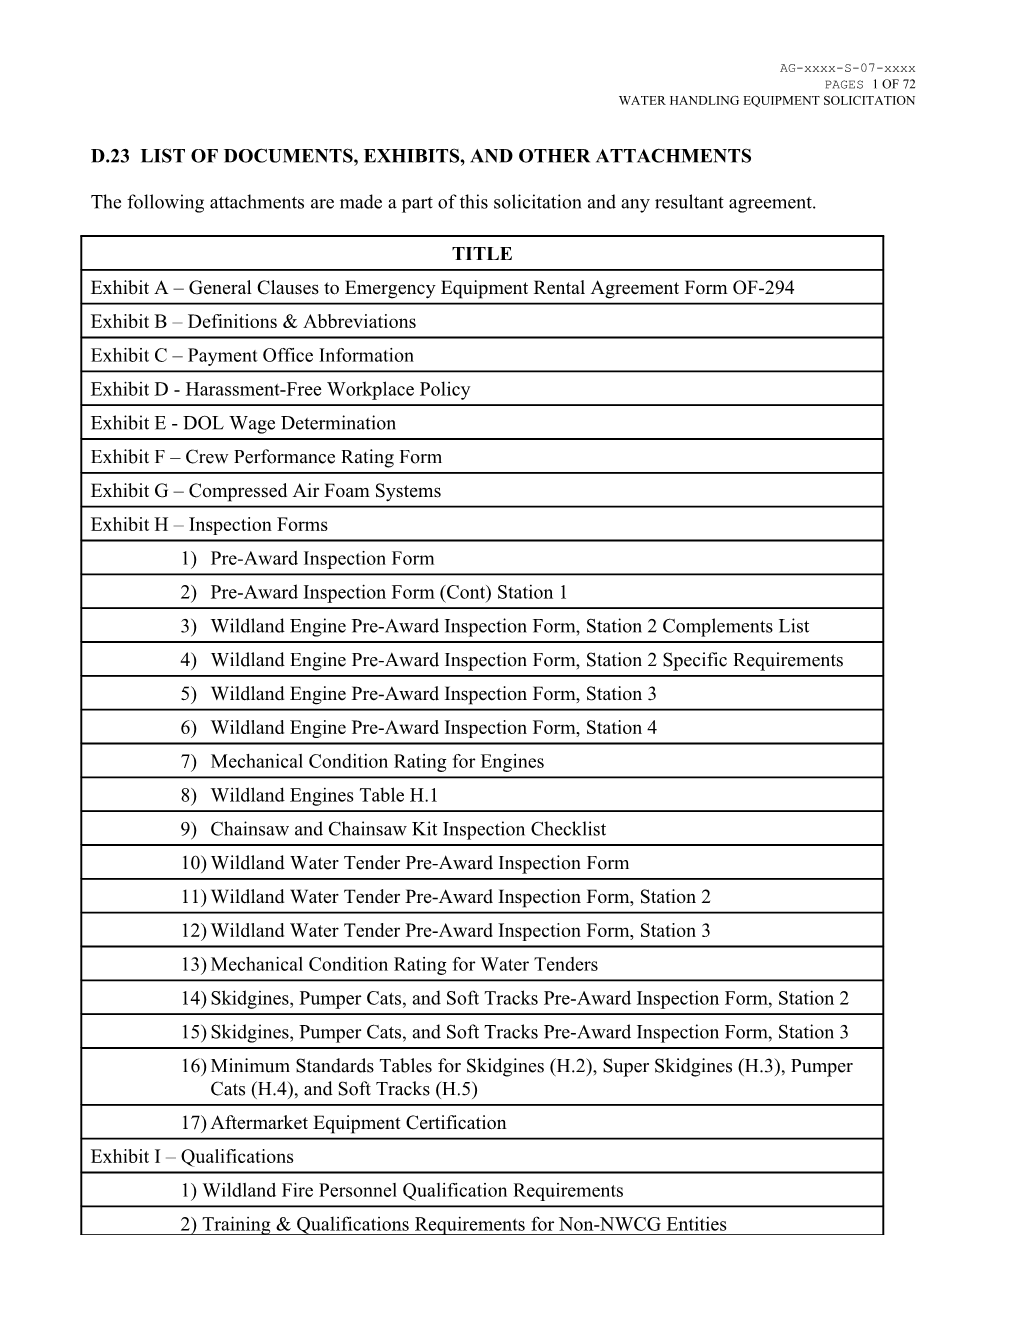 D.23 List of Documents, Exhibits, and Other Attachments